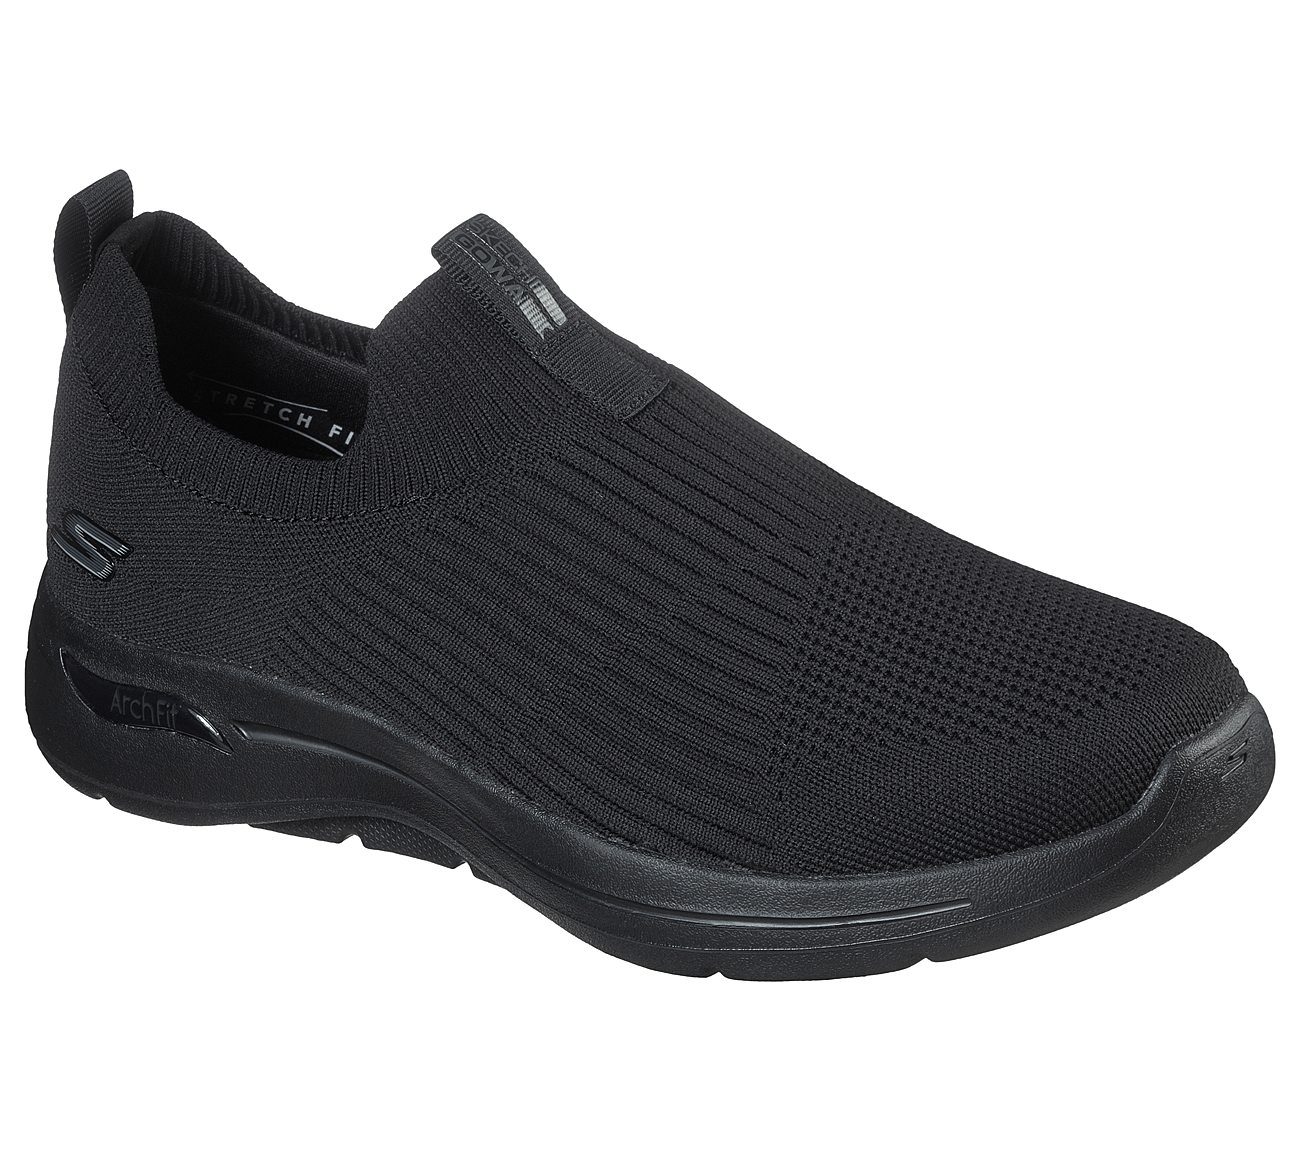 GO WALK ARCH FIT - ICONIC, BBLACK Footwear Lateral View